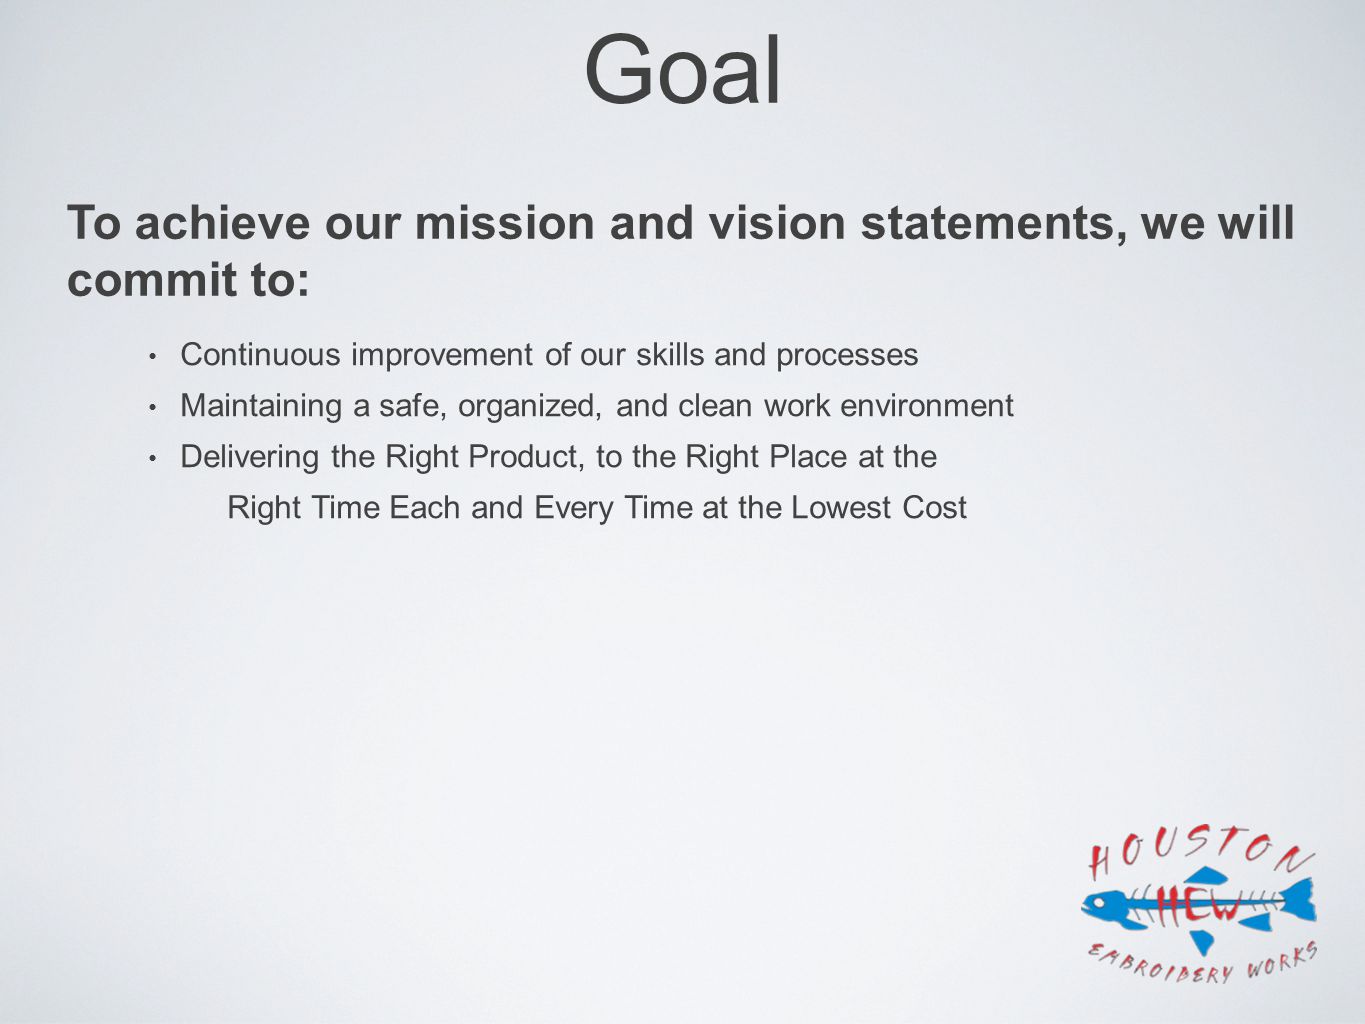 Goal Continuous improvement of our skills and processes Maintaining a safe, organized, and clean work environment Delivering the Right Product, to the Right Place at the Right Time Each and Every Time at the Lowest Cost To achieve our mission and vision statements, we will commit to: